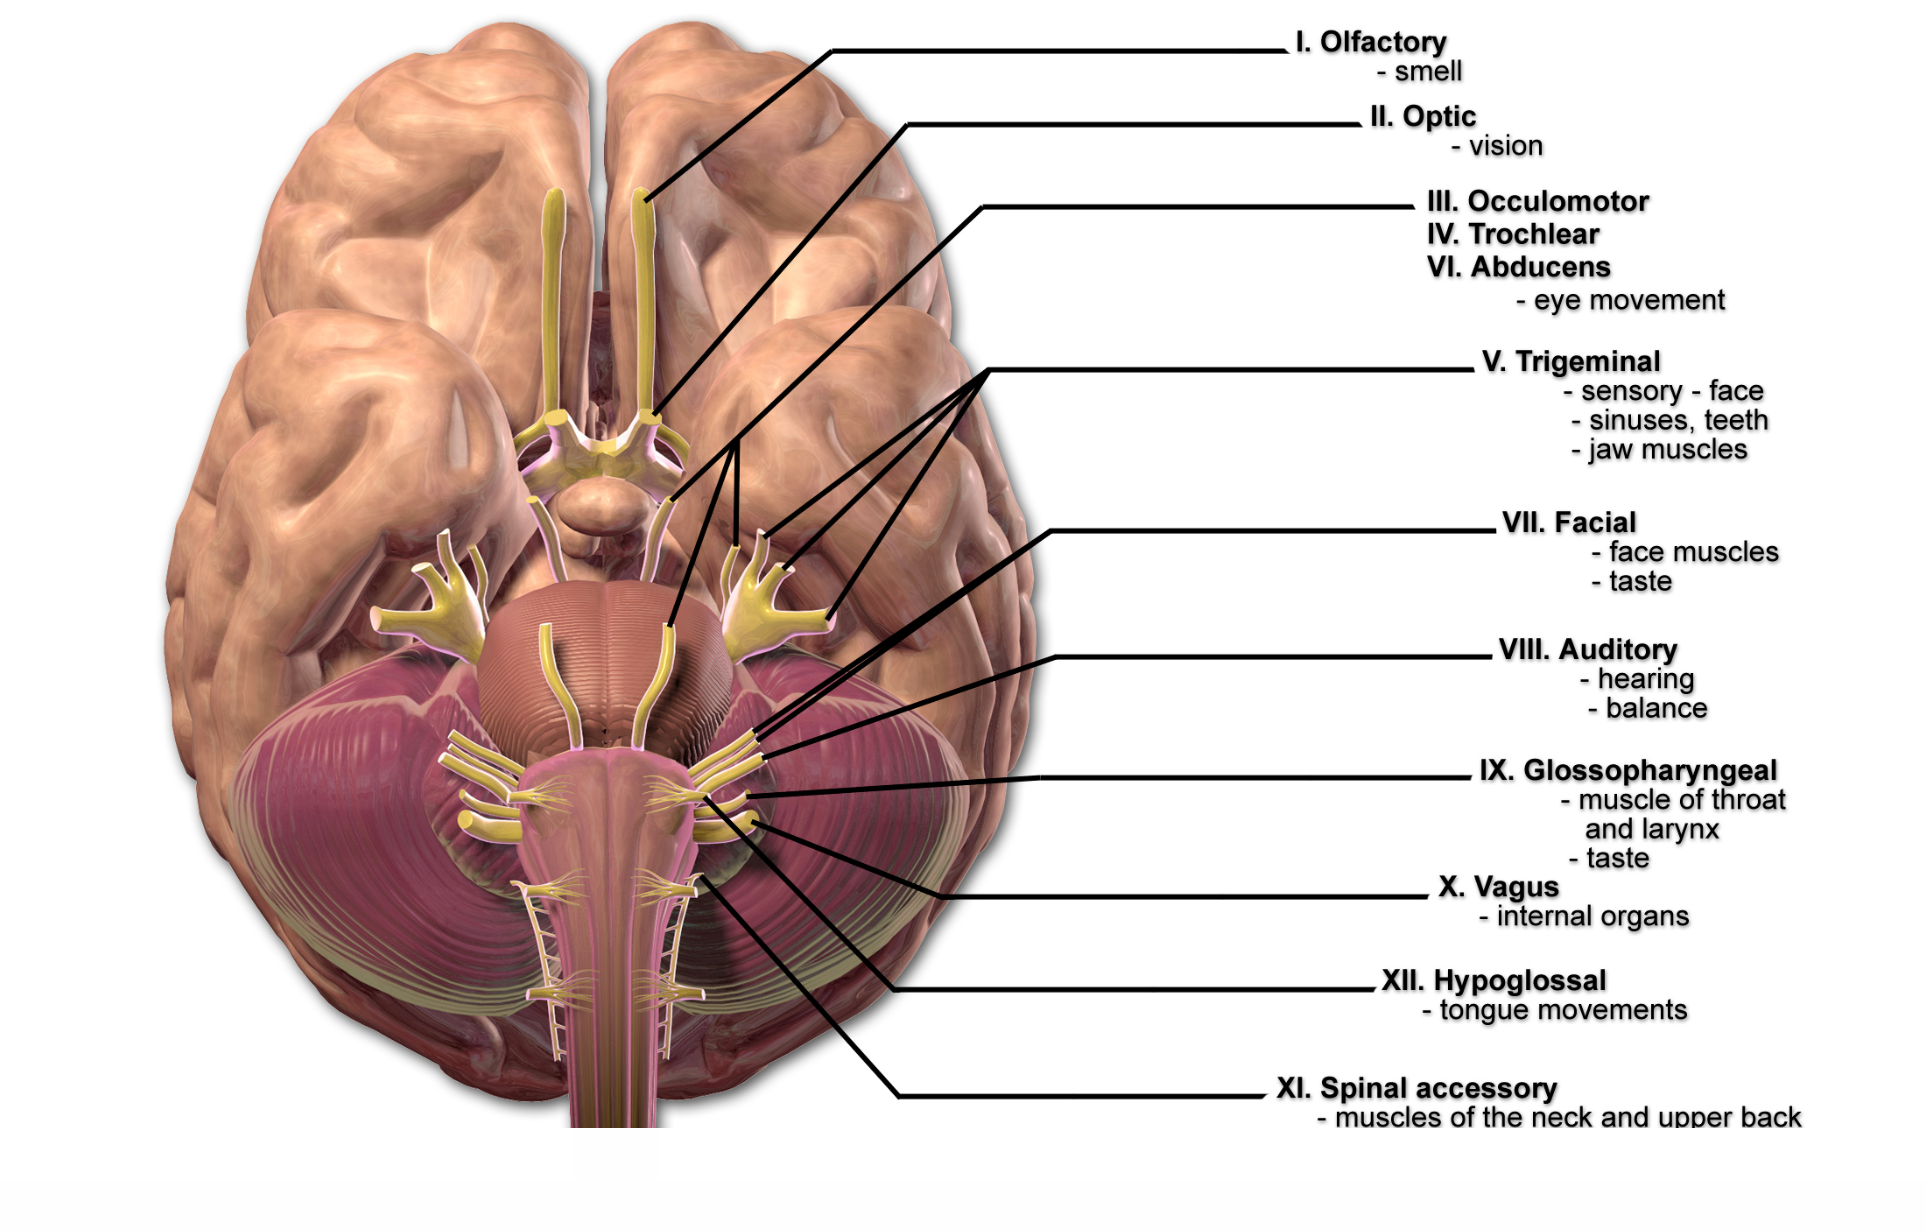 Image of cranial nerves labeled